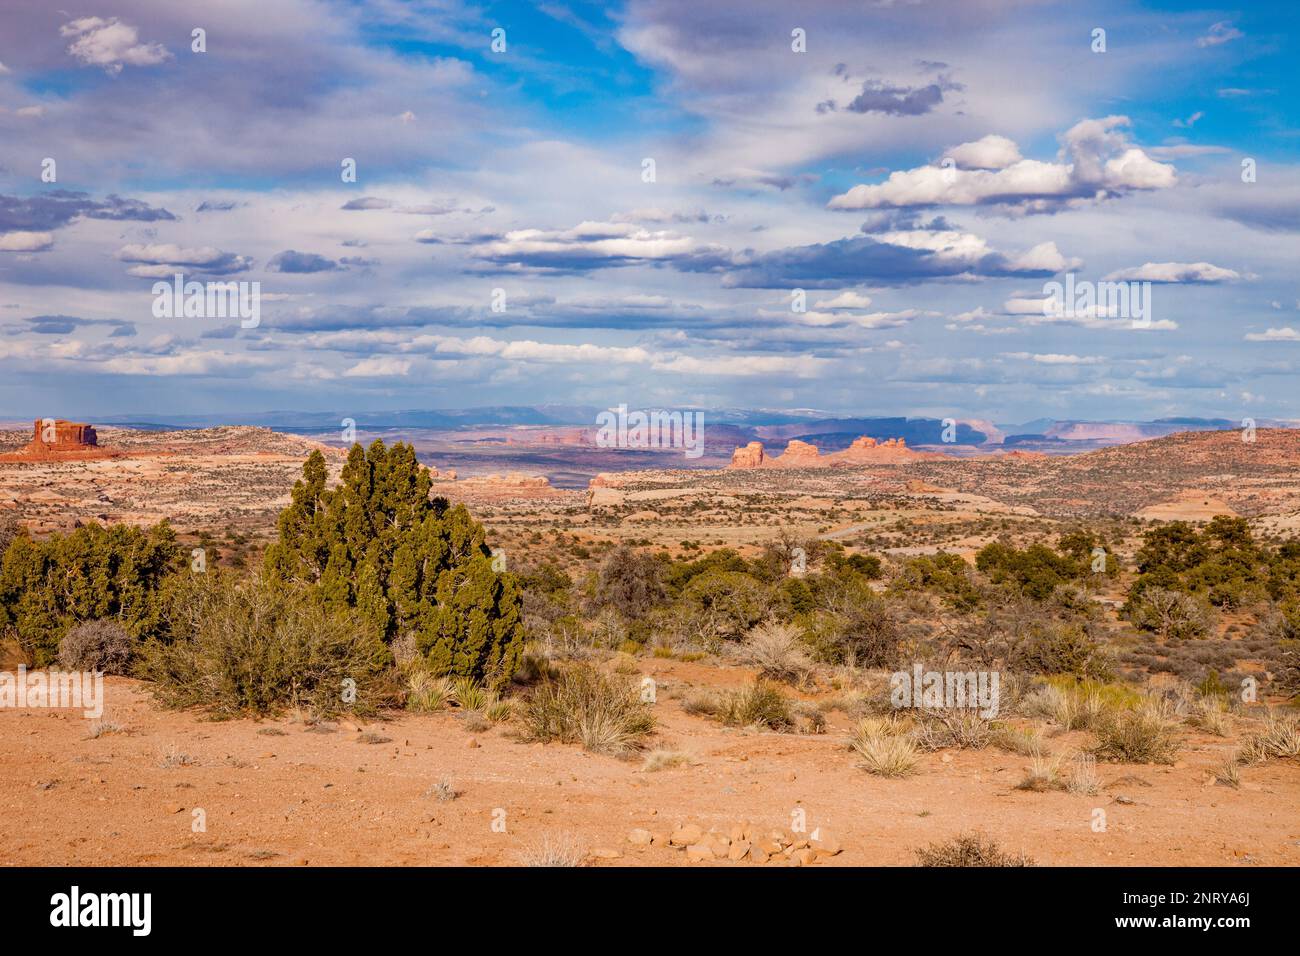 View of Arth's Pasture, Arth's Rima & distant Arches National Park from the Plateau Viewpoint, Moab, Utah.  Monitor Butte is at far left. Stock Photo